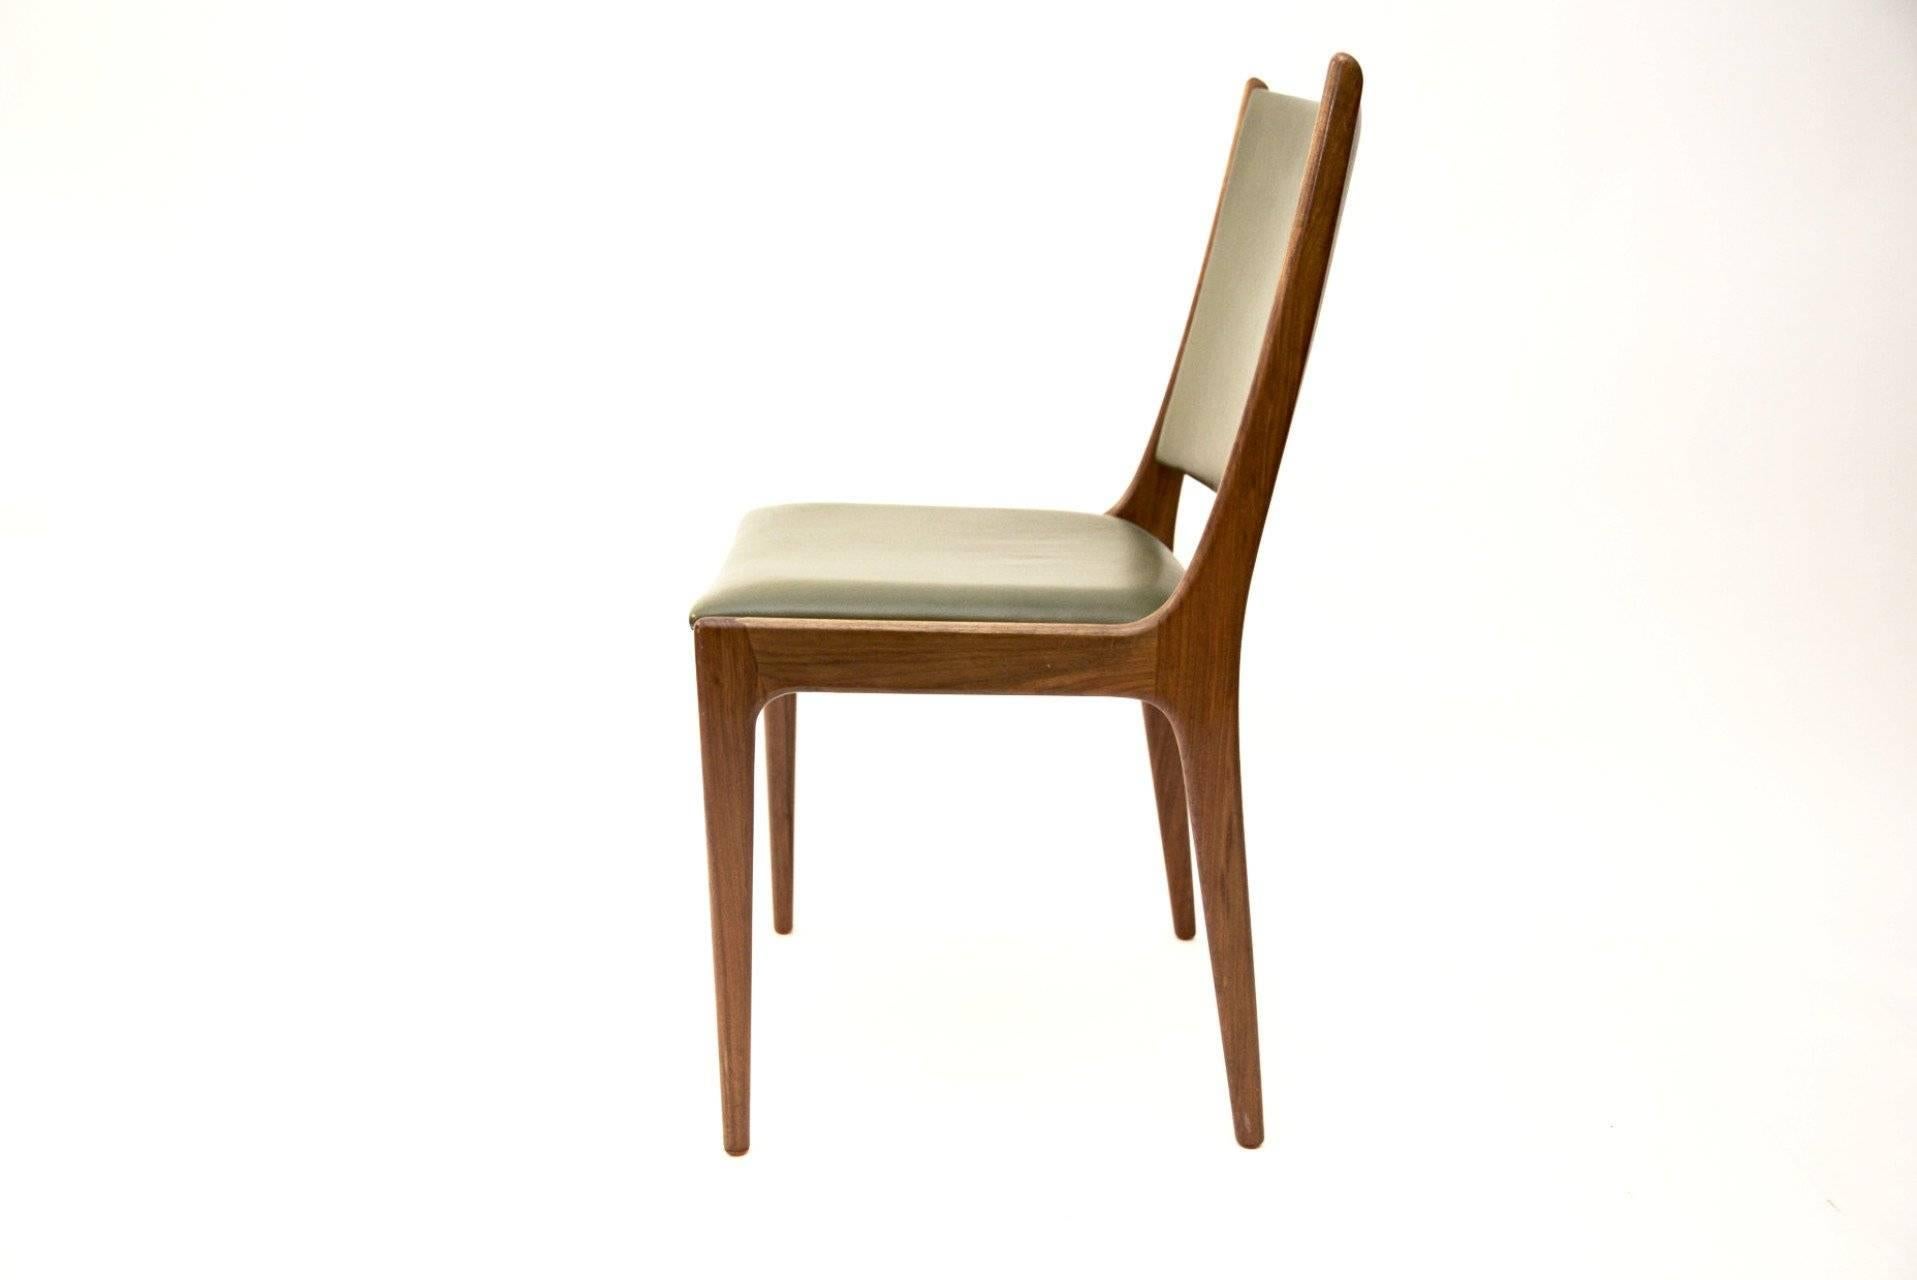 These wonderful four dining chairs in Teak with green leather are designed by Johannes Andersen and made by Uldum Møbelfabrik. The model is from the 1960s.

We sell them as a set.